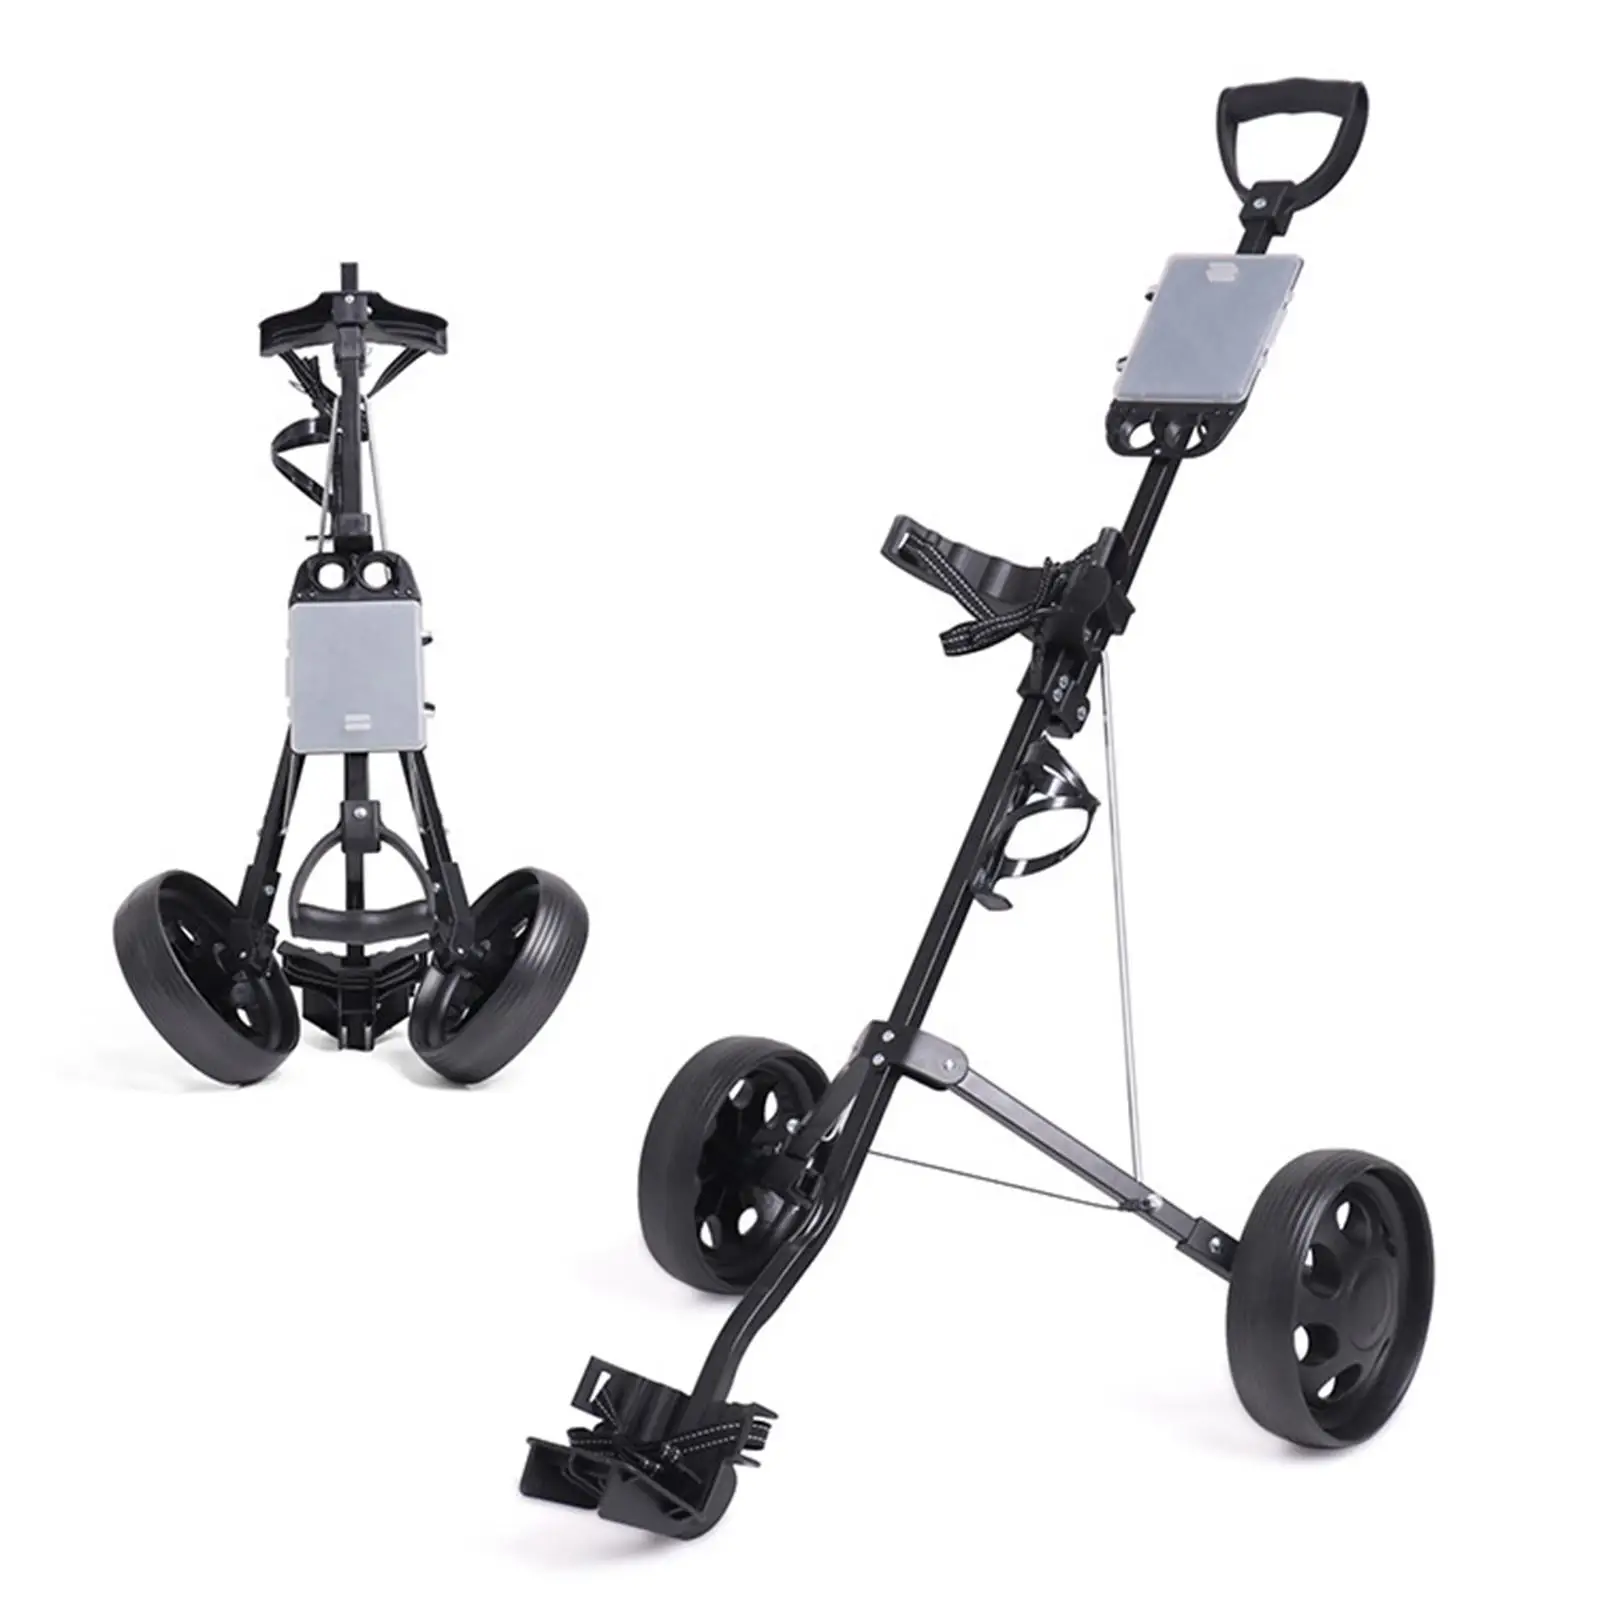 Folding Golf Pull Cart 2 Wheel Adjustable Handle Angle Walking Cart Portable Collapsible Golf Trolley for Kids Women